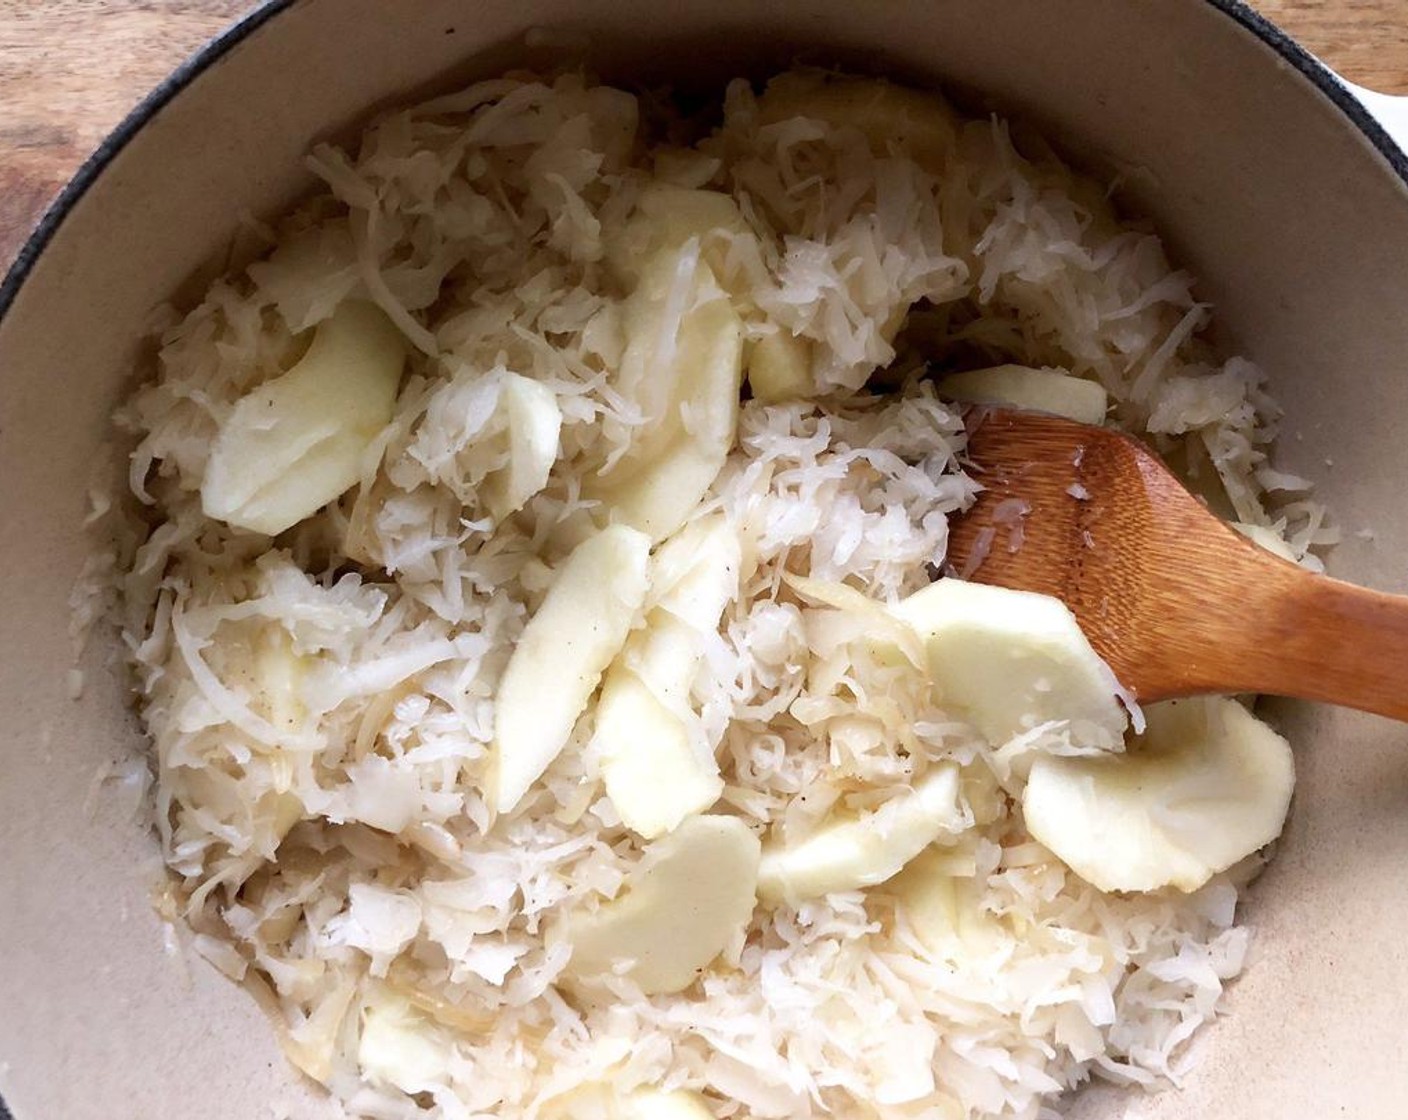 step 3 Stir in the Sauerkraut (12 cups), Fuji Apples (2), and Dry White Wine (1 cup).  Bring to a boil. Reduce heat; simmer, covered, for about 1 hour or until sauerkraut is very tender, stirring occasionally.